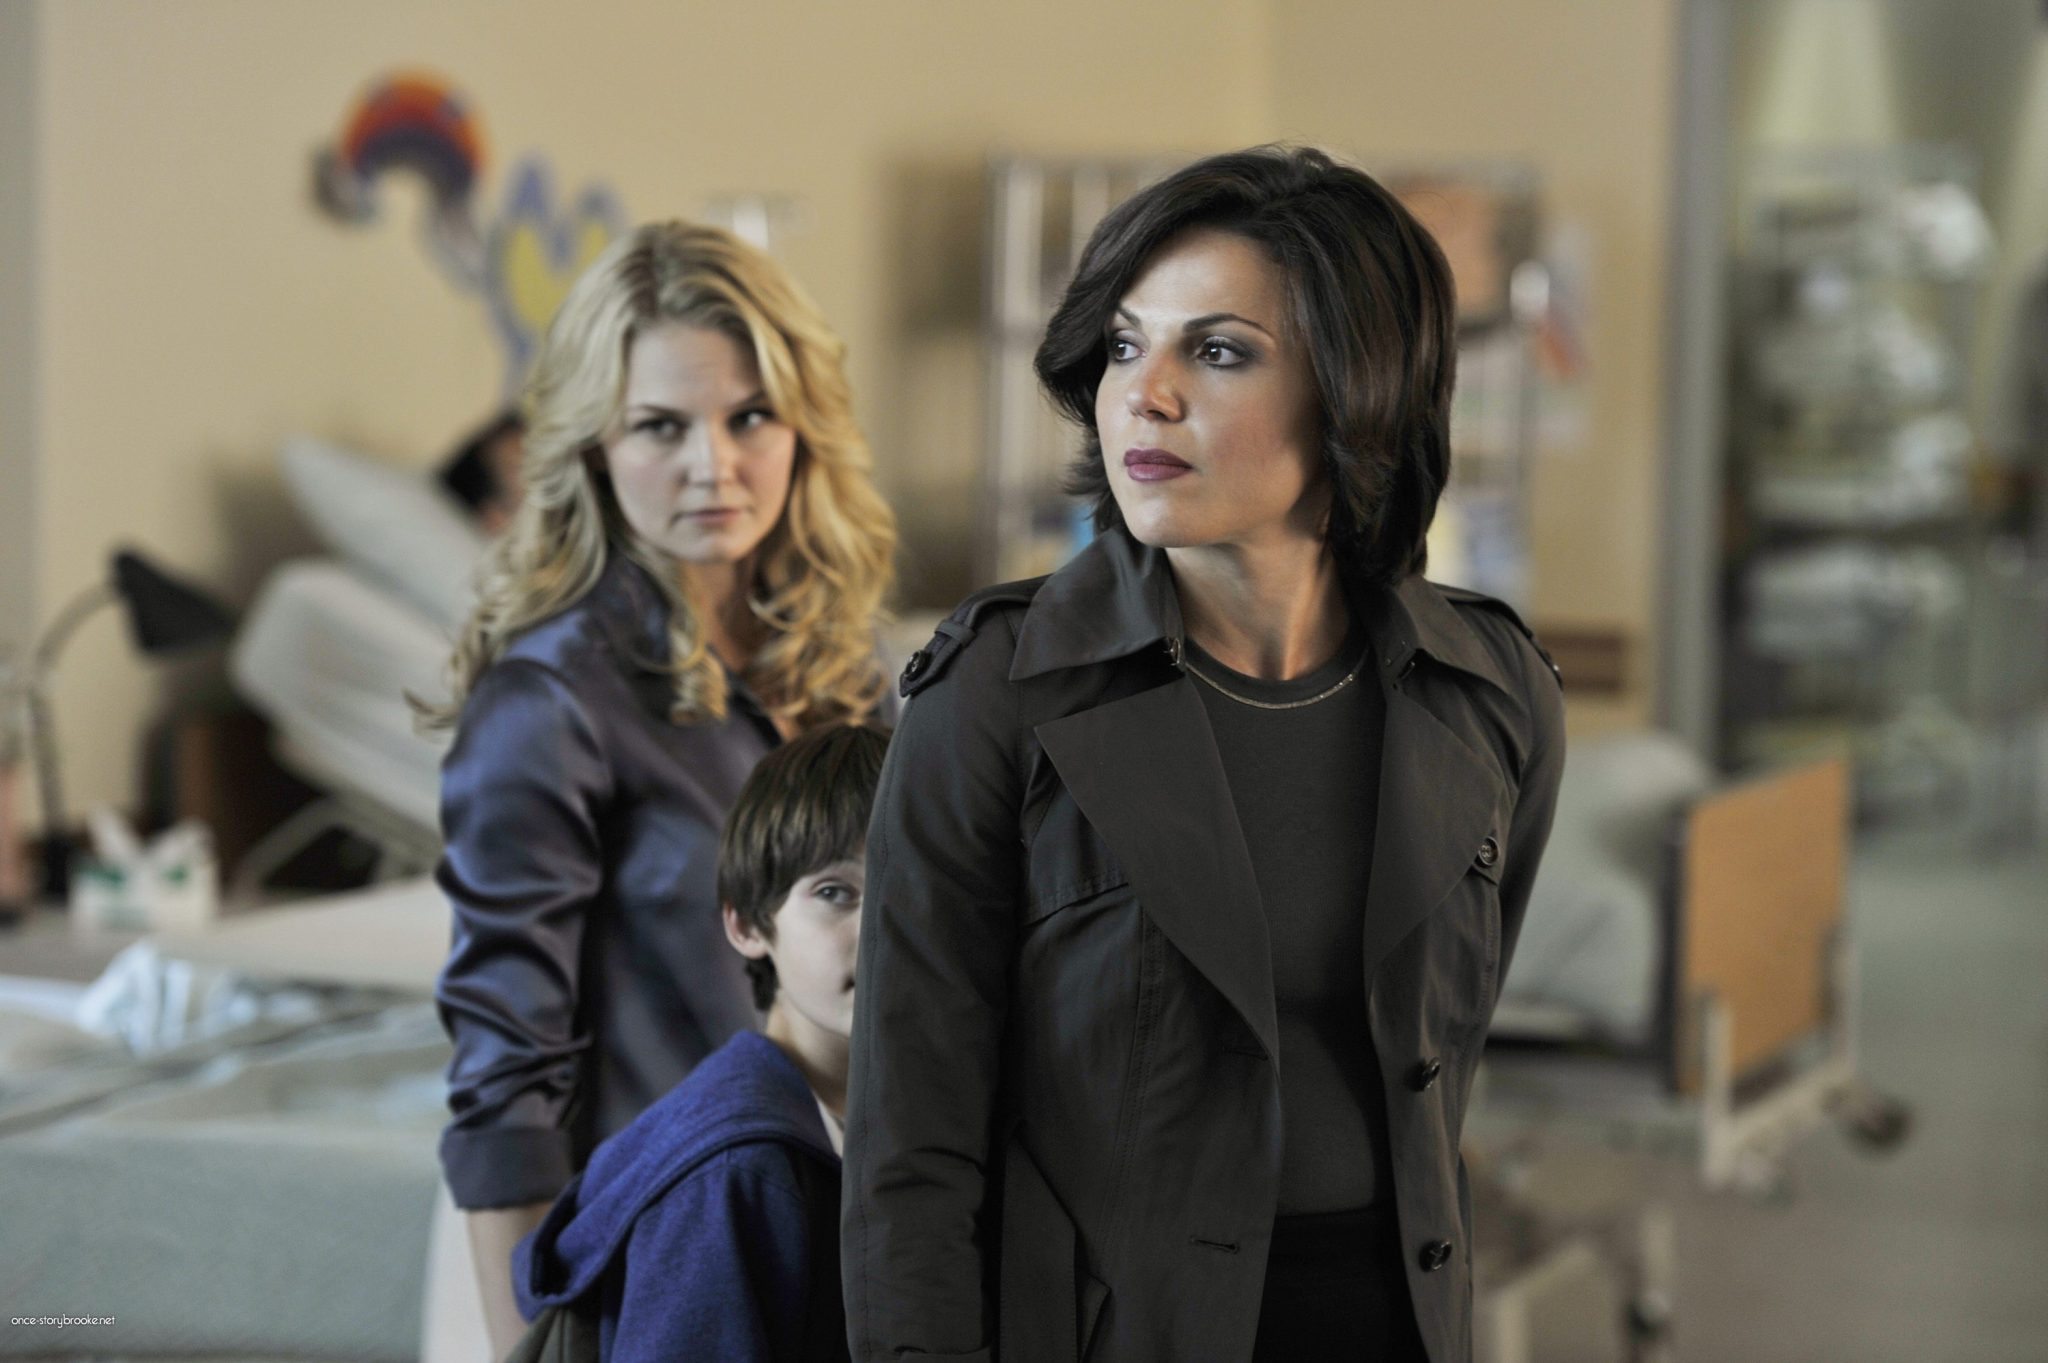 Regina-Emma-And-Henry-once-upon-a-time-36880209-3000-1996